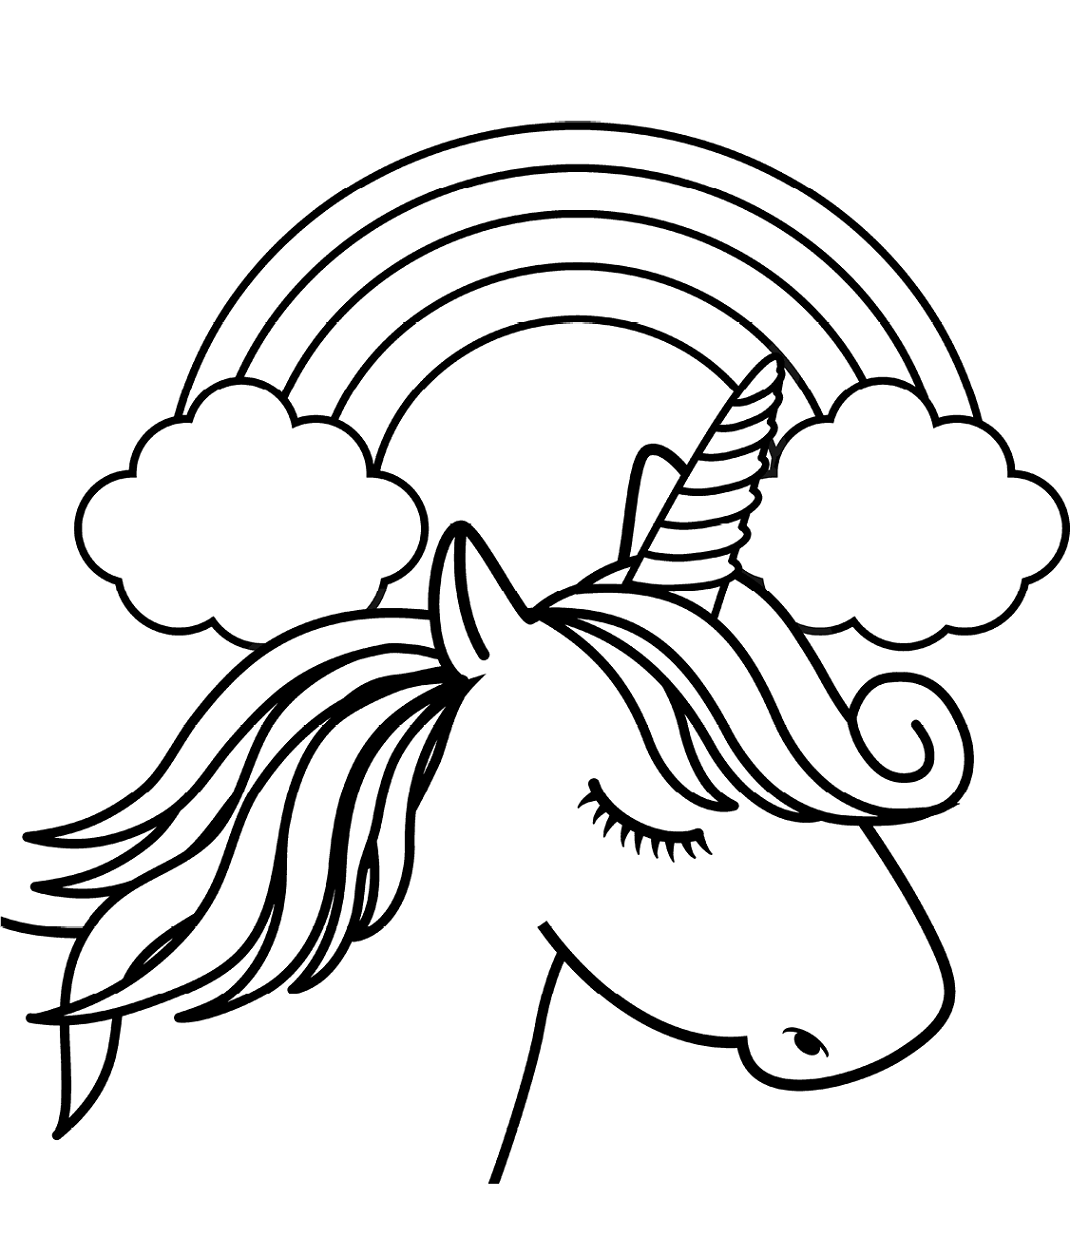 Unicorn Head In Front Of Rainbow Coloring Page - Free Printable Coloring Pages for Kids